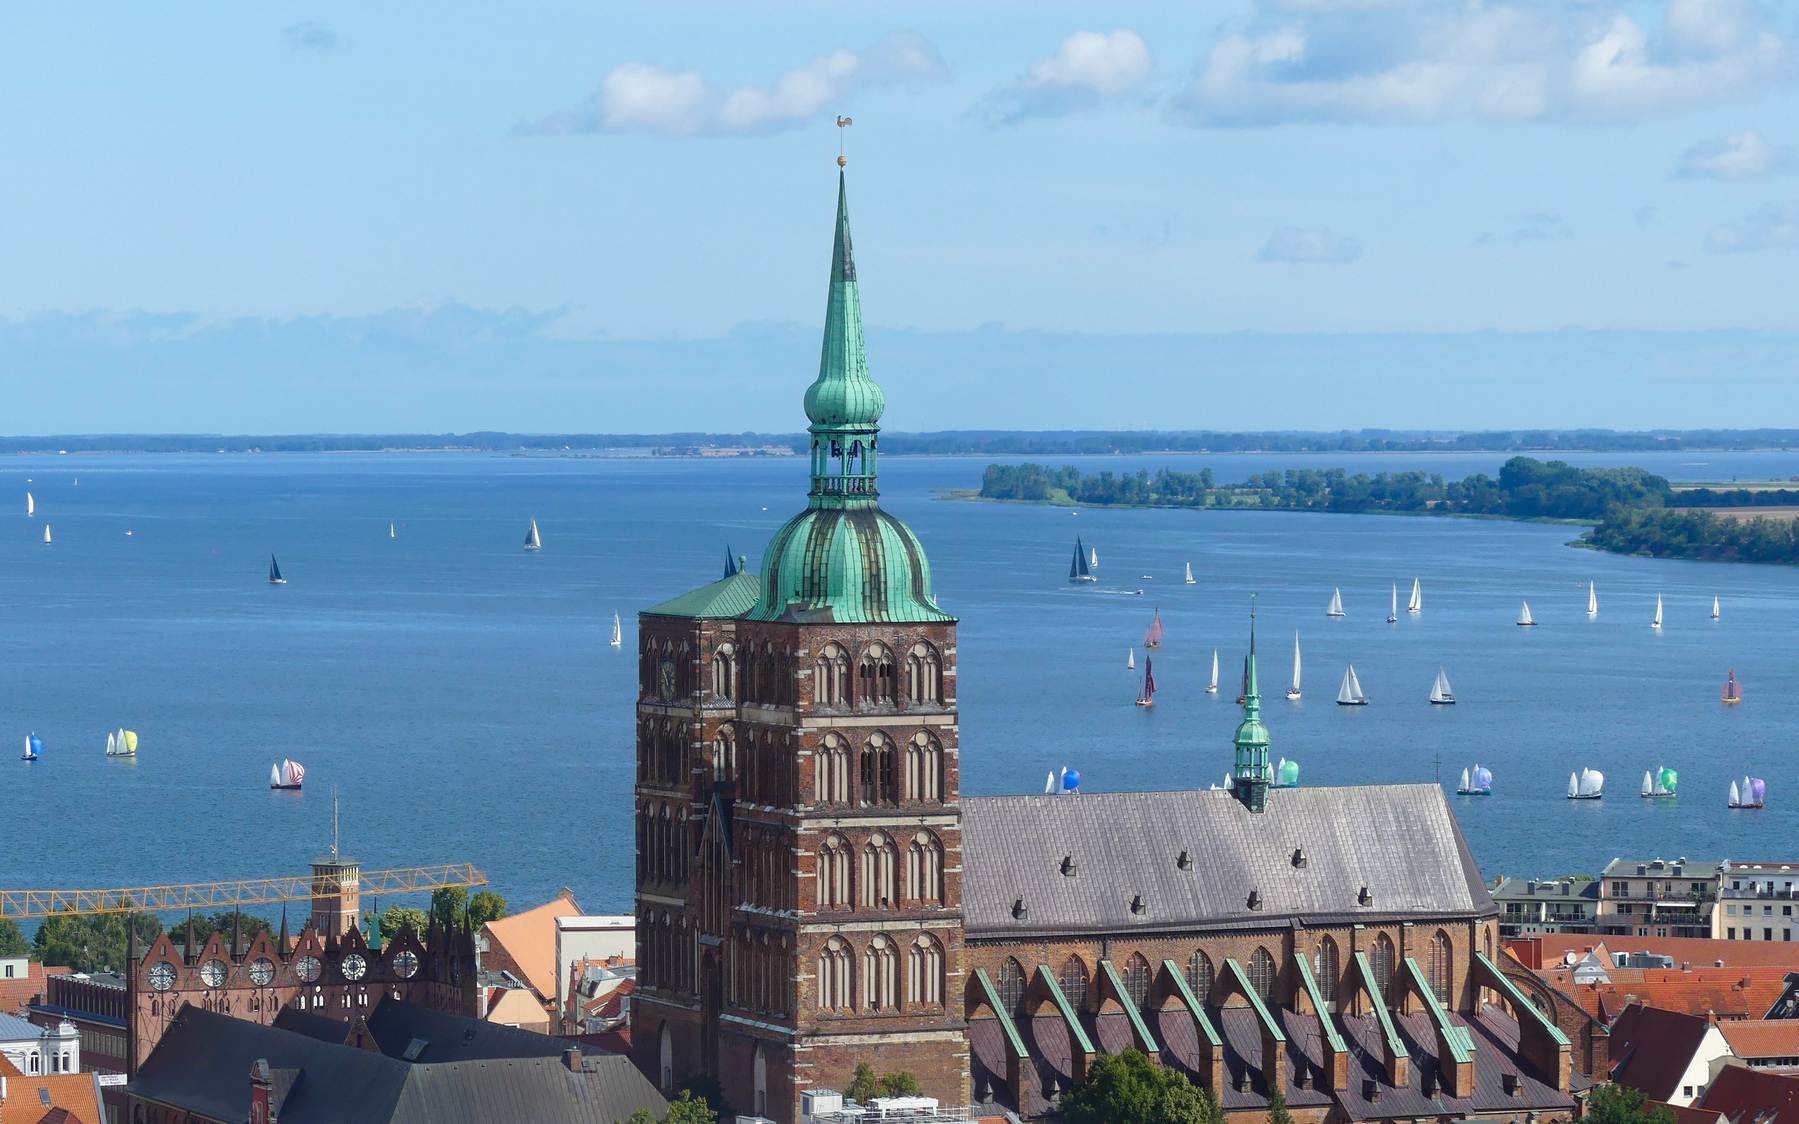 View from the tower of St Marien Kirche over Stralsund. Among other things, you can see the towers of the St Nikolai Kirche. On the water between Stralsund and Rüggen are many small sailboats